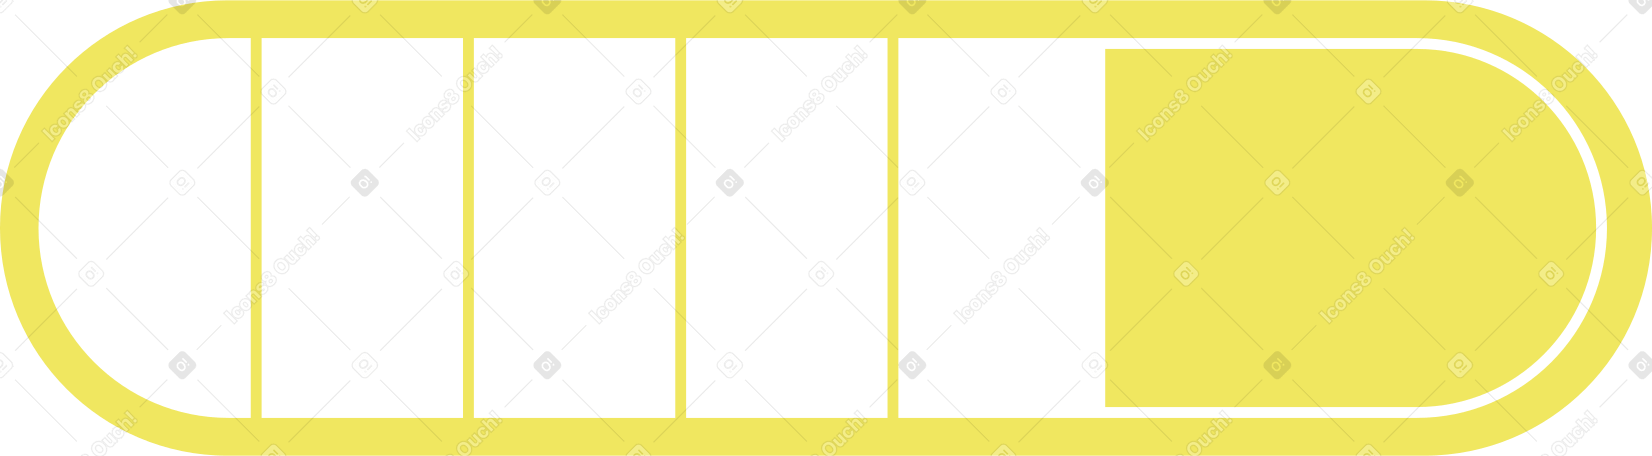 yellow rounded progress bar Illustration in PNG, SVG